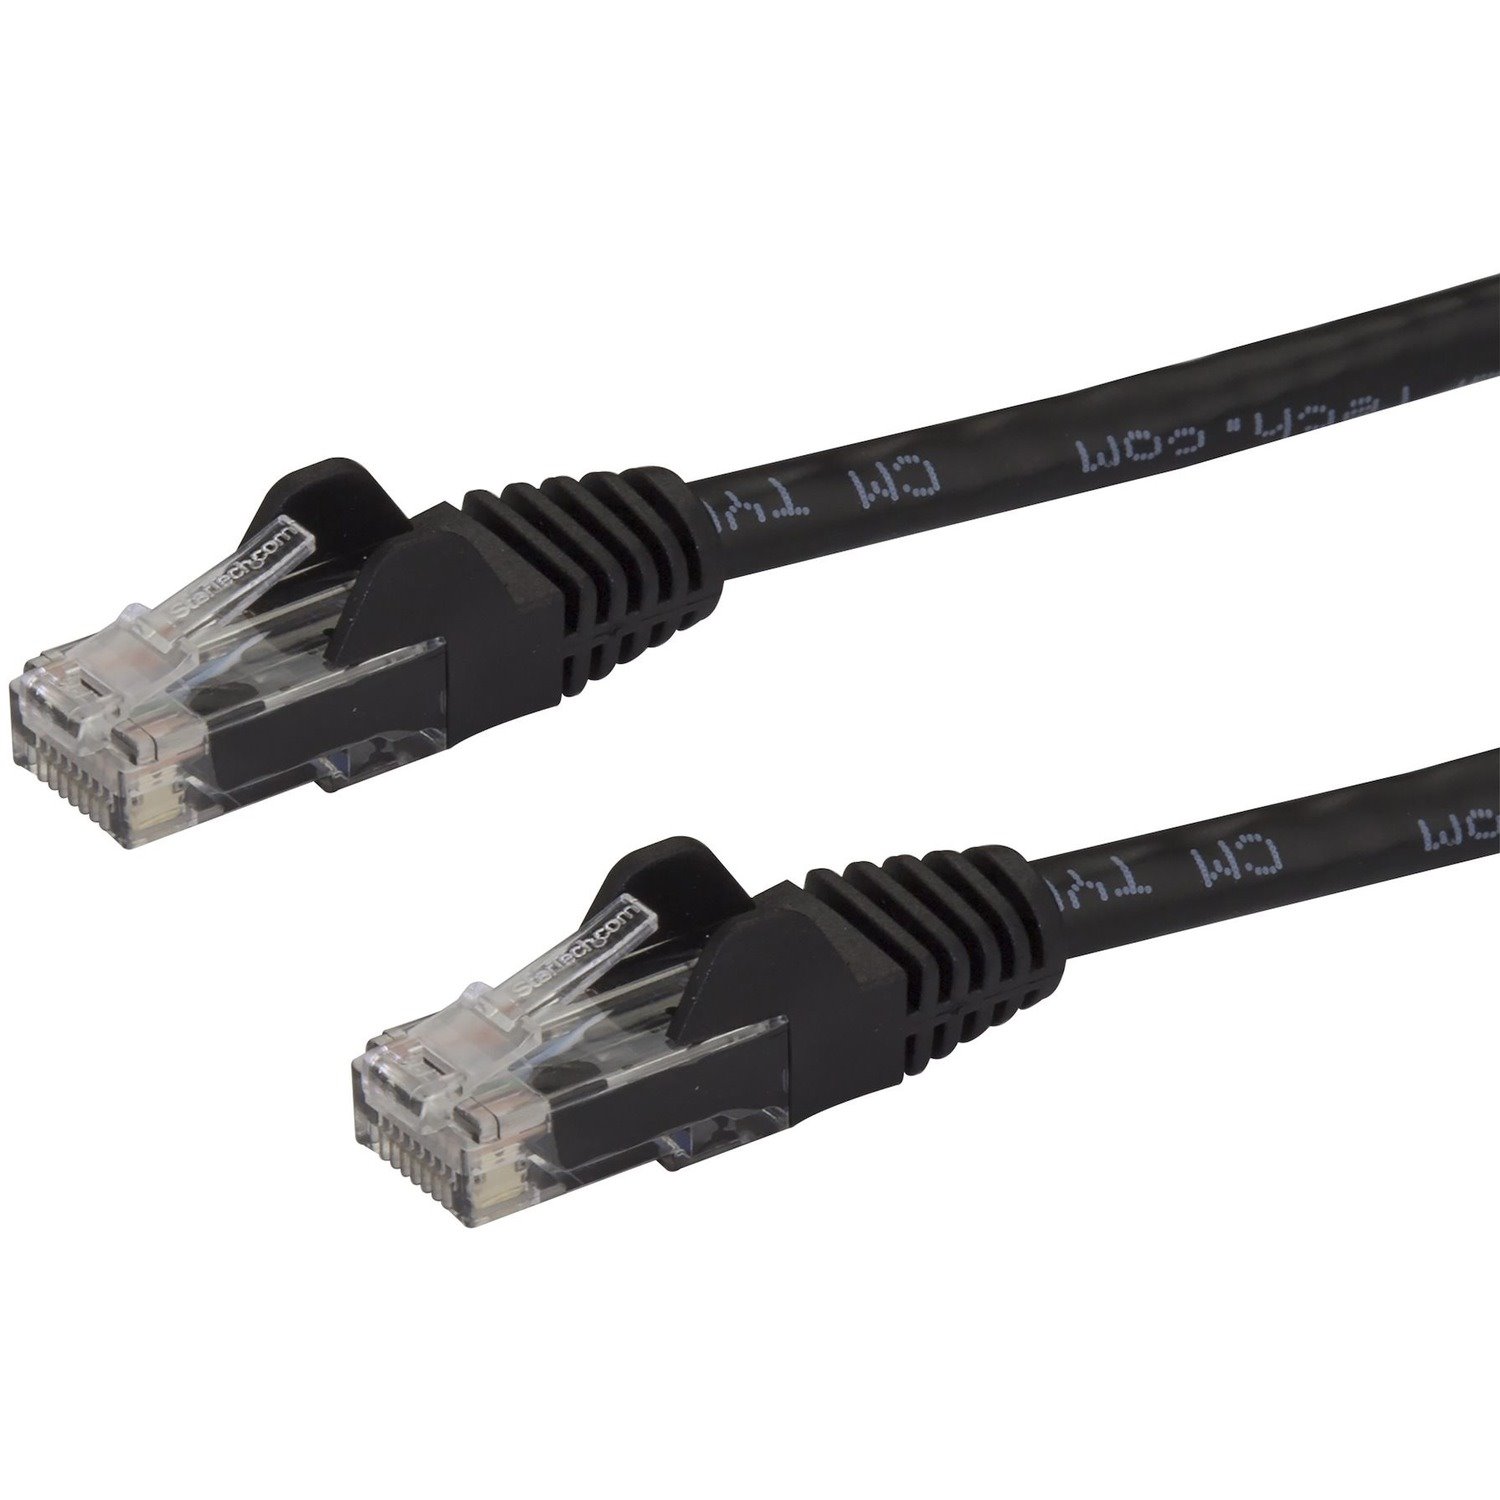 StarTech.com 2m CAT6 Ethernet Cable - Black Snagless Gigabit - 100W PoE UTP 650MHz Category 6 Patch Cord UL Certified Wiring/TIA